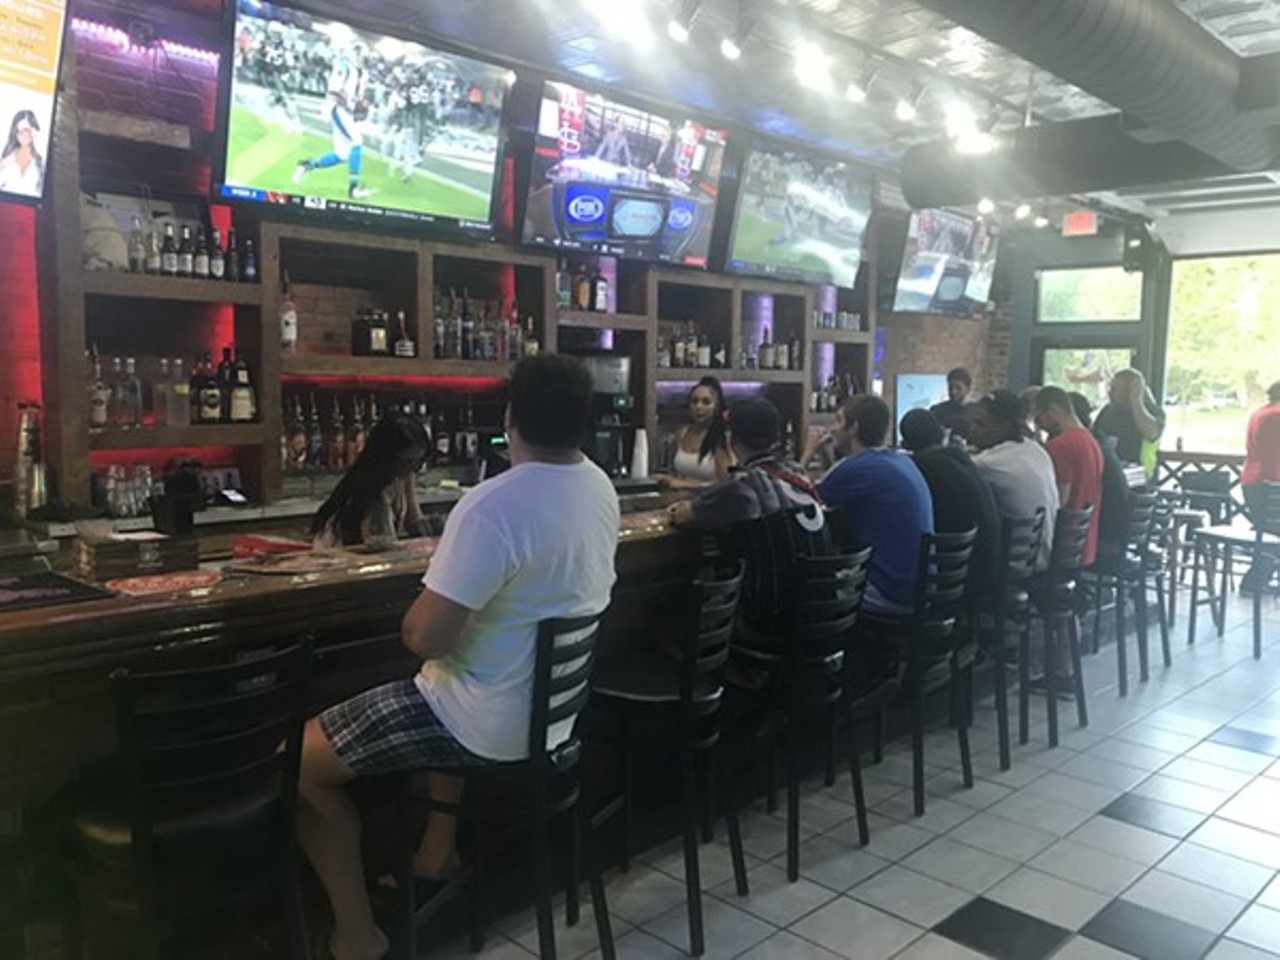 Best Bar To Hang Out With Bartenders
DB Cooper's Safe House6109 Gravois Avenue314-499-7119
Photo courtesy of Desi Isaacson